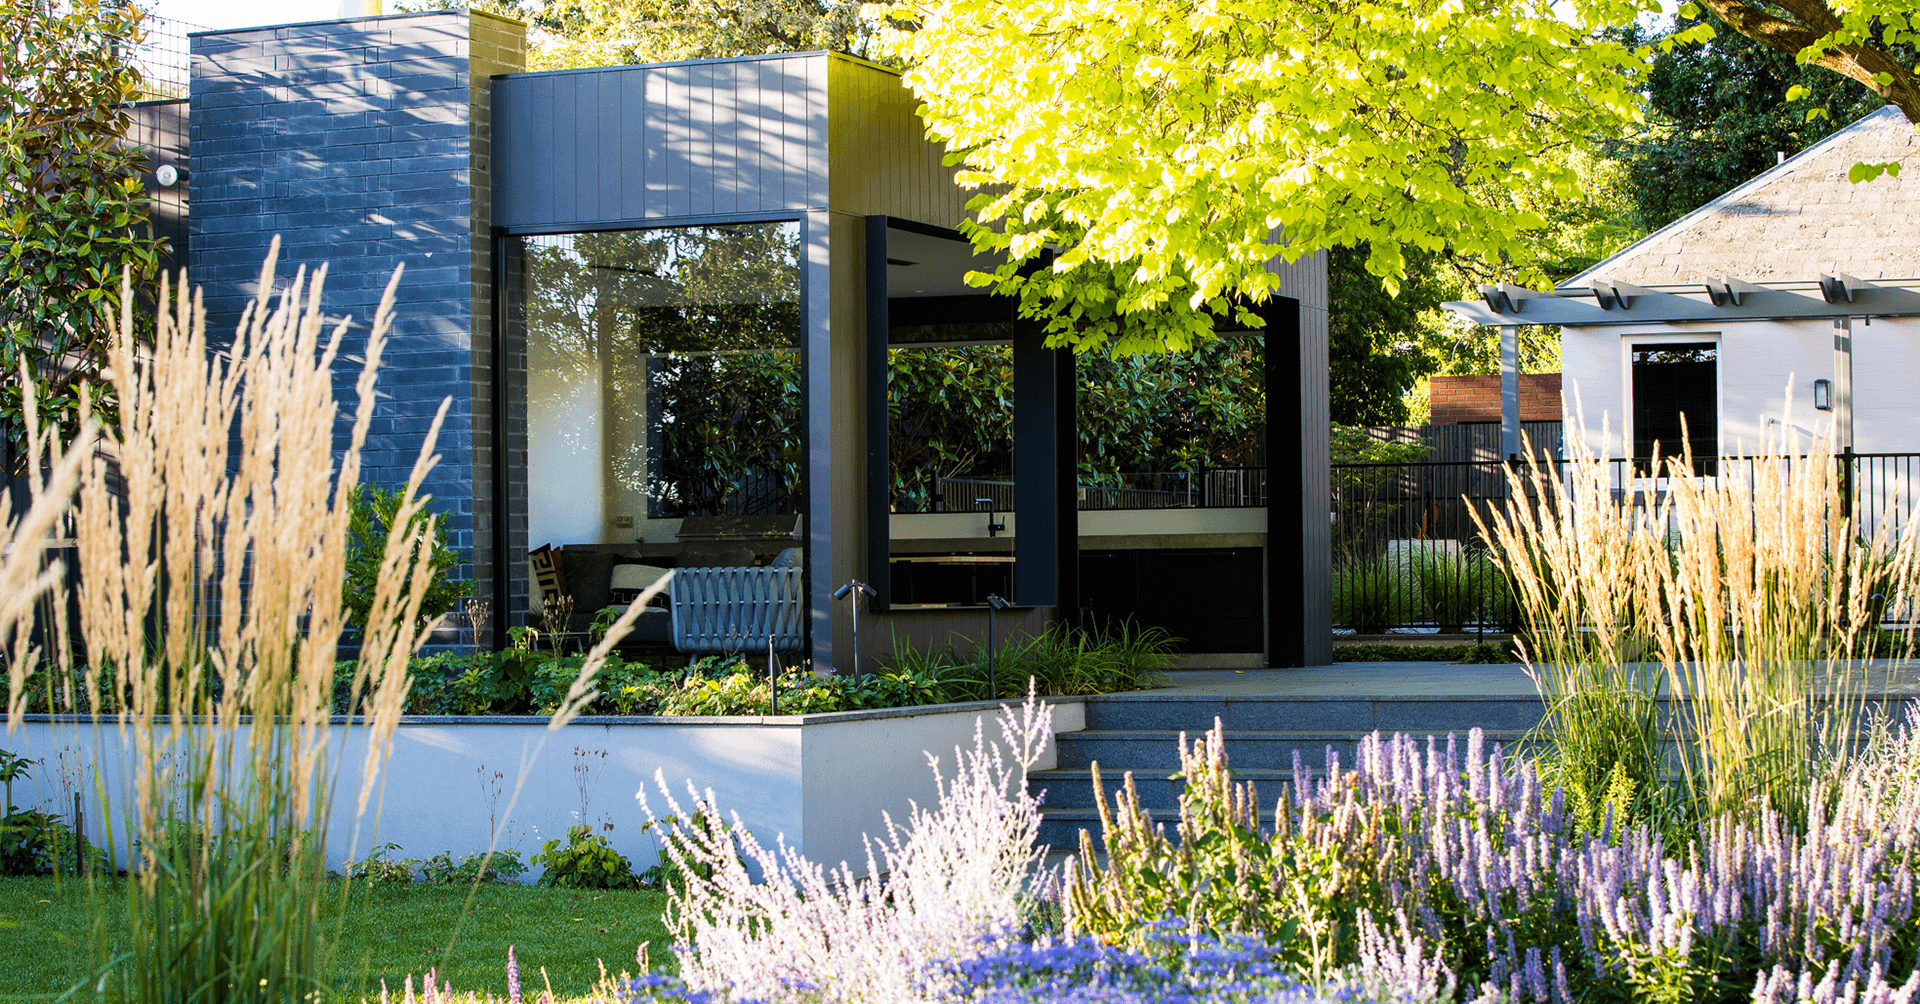 Camberwell Landscape Design and Construction by Ian Barker Gardens